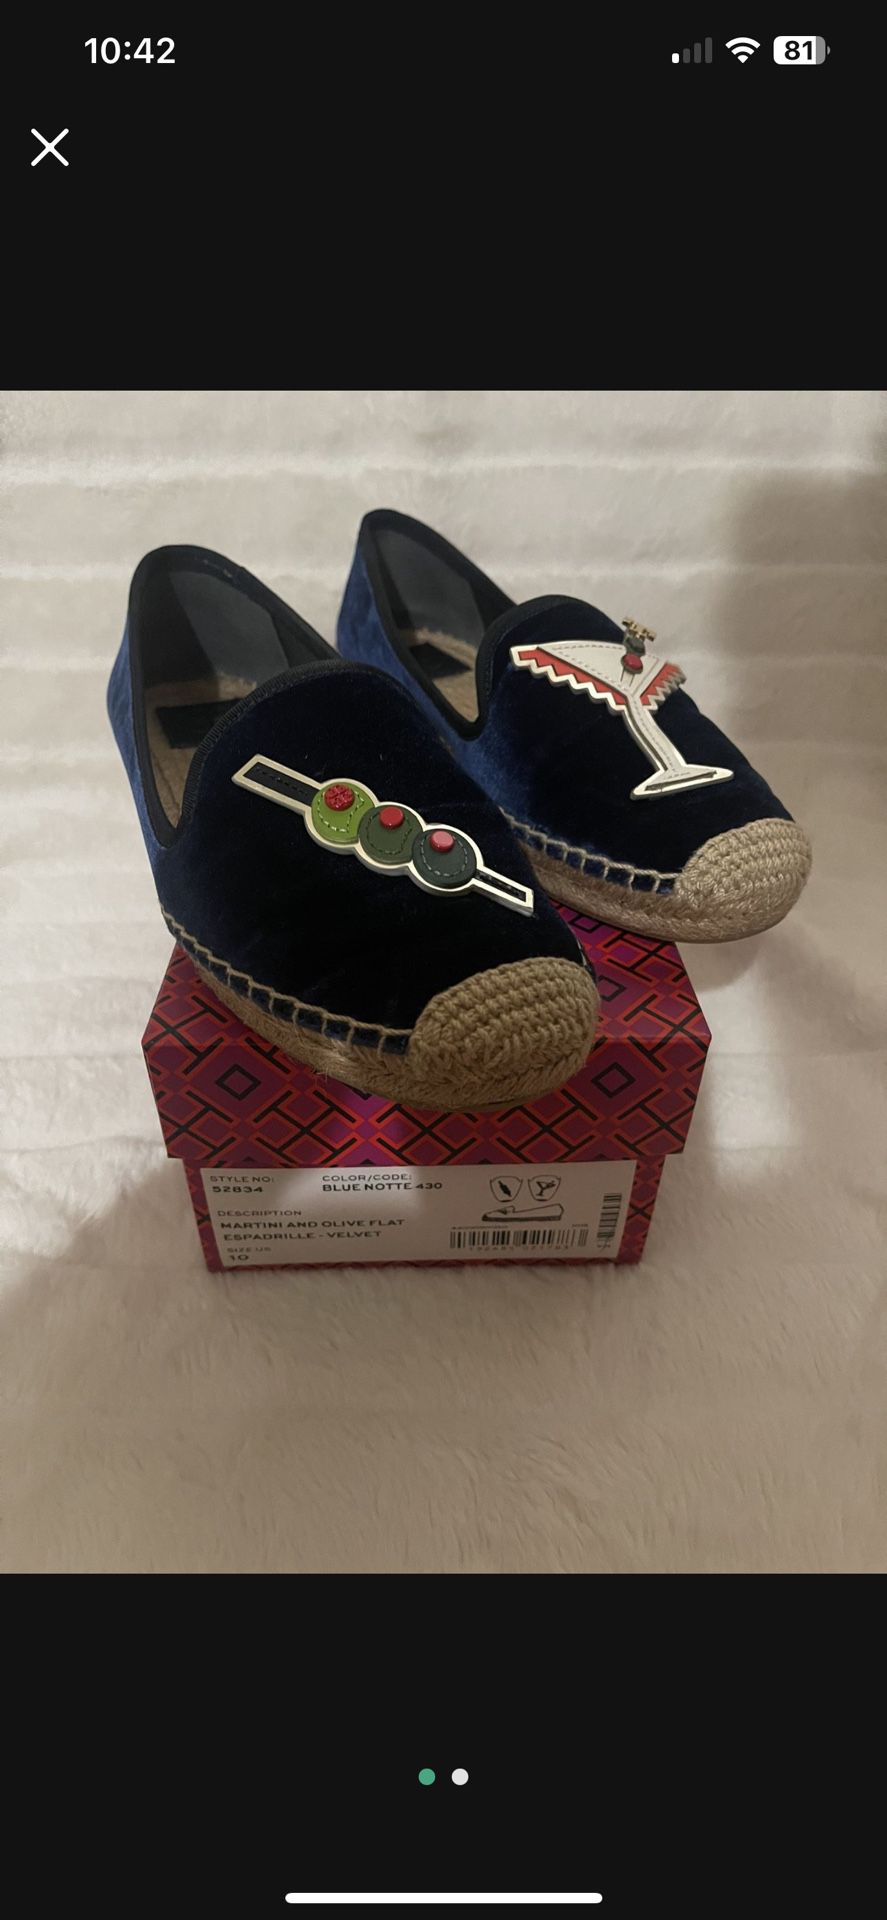 Tory Burch Flats 10 for Sale in Huntington Beach, CA - OfferUp